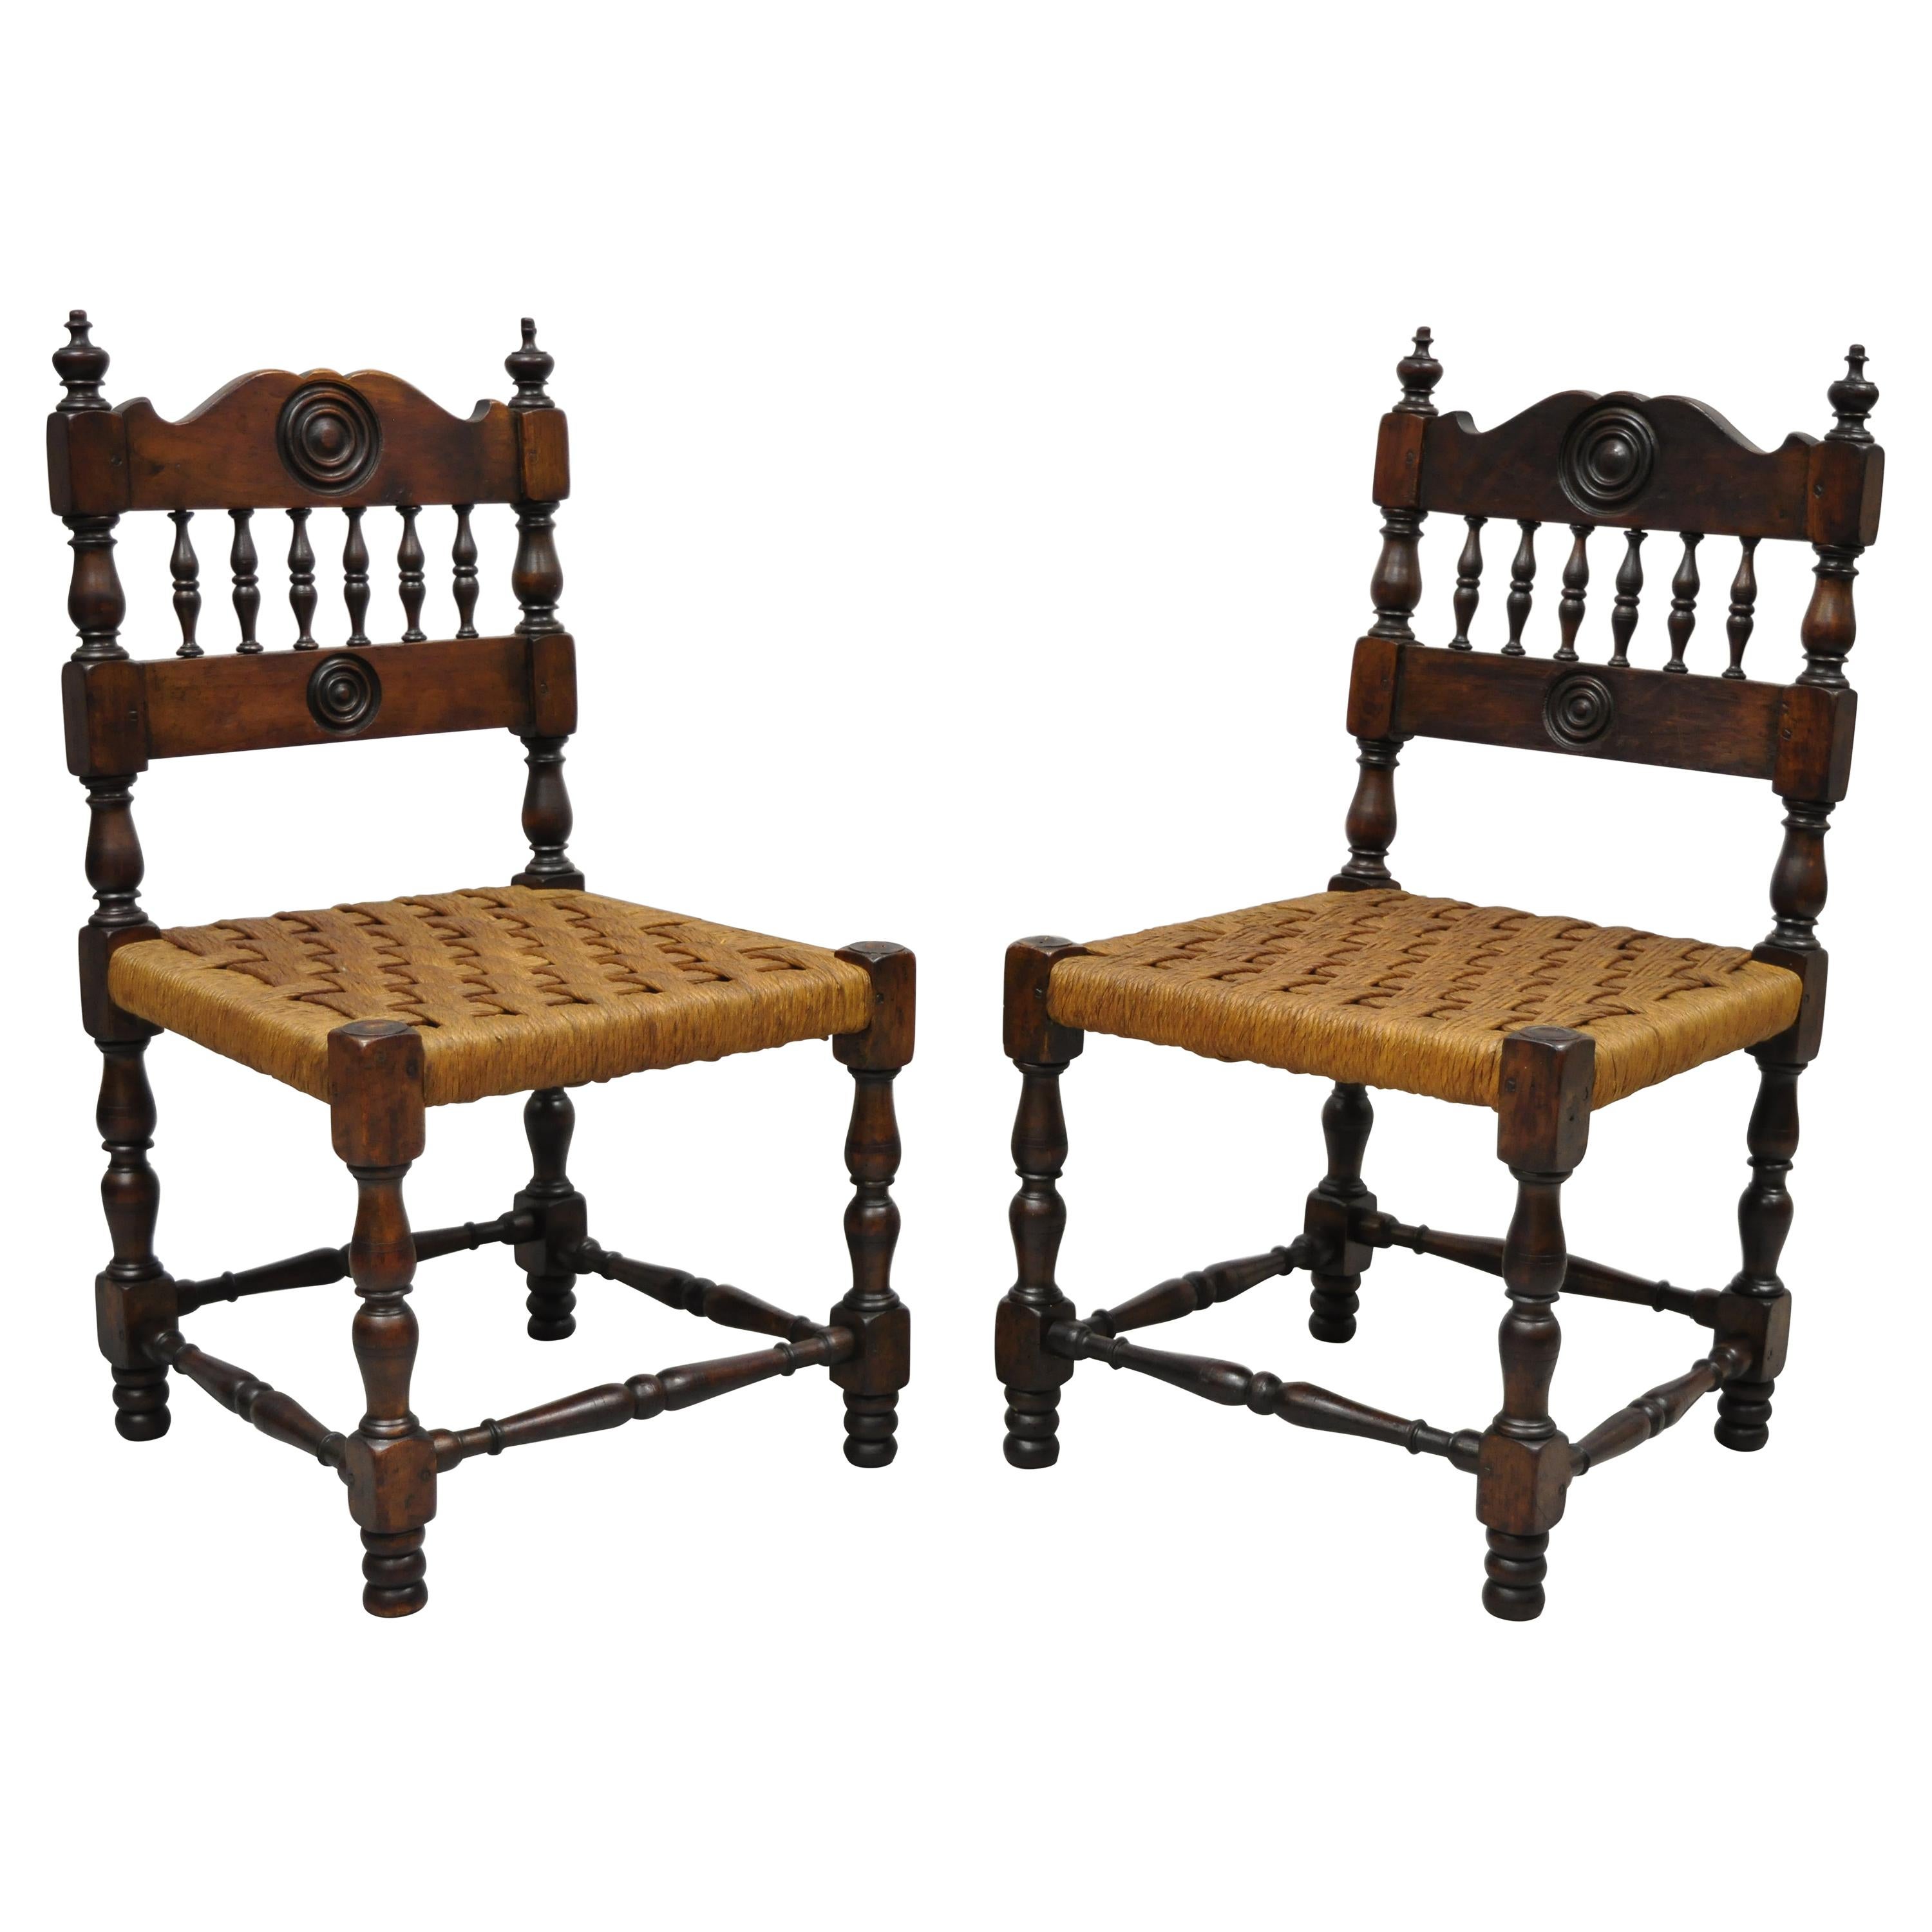 Antique Henry II Walnut Rush Seat Small Childrens Child Side Chairs, a Pair